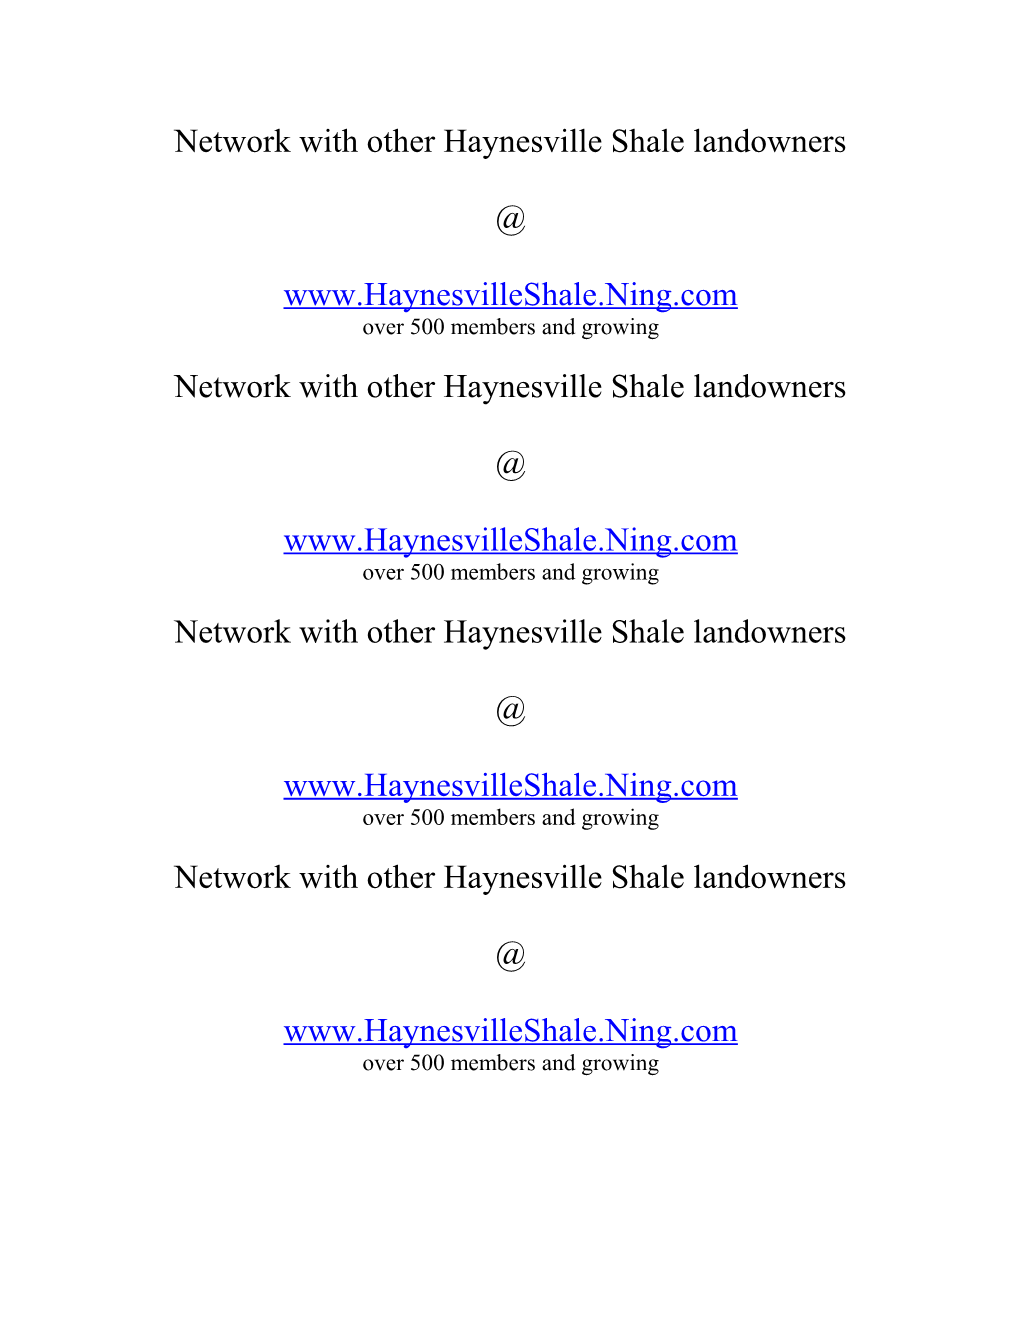 Network With Other Haynesville Shale Landowners